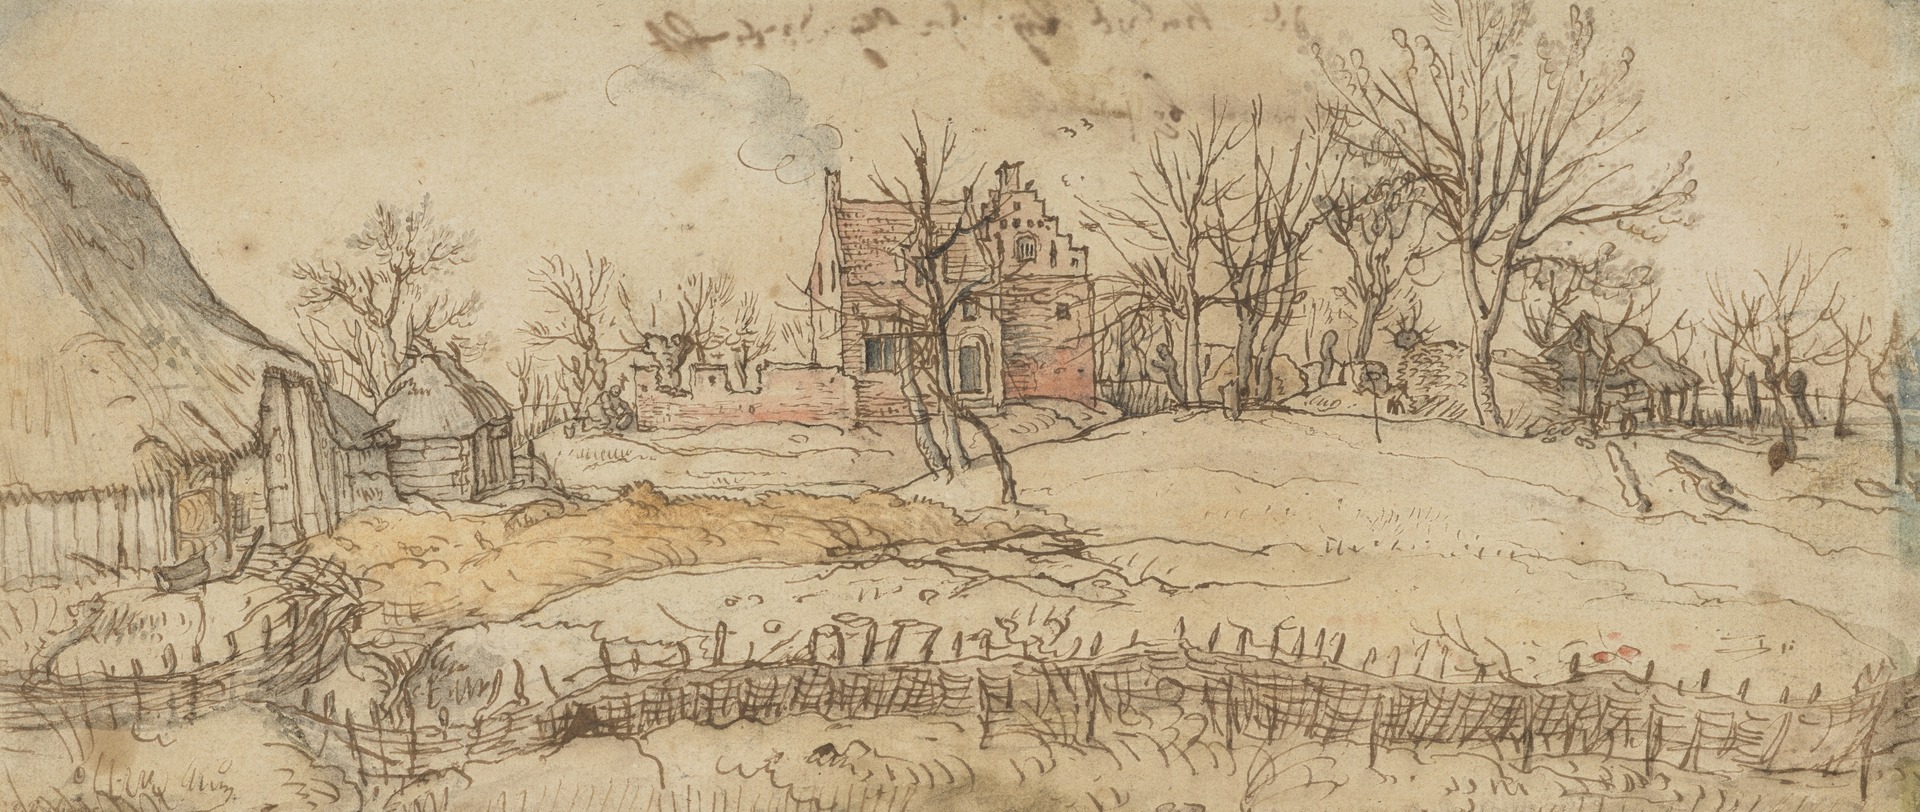 A 17th Drawing of a Scottish Farm Near Zwyndrecht, NGS